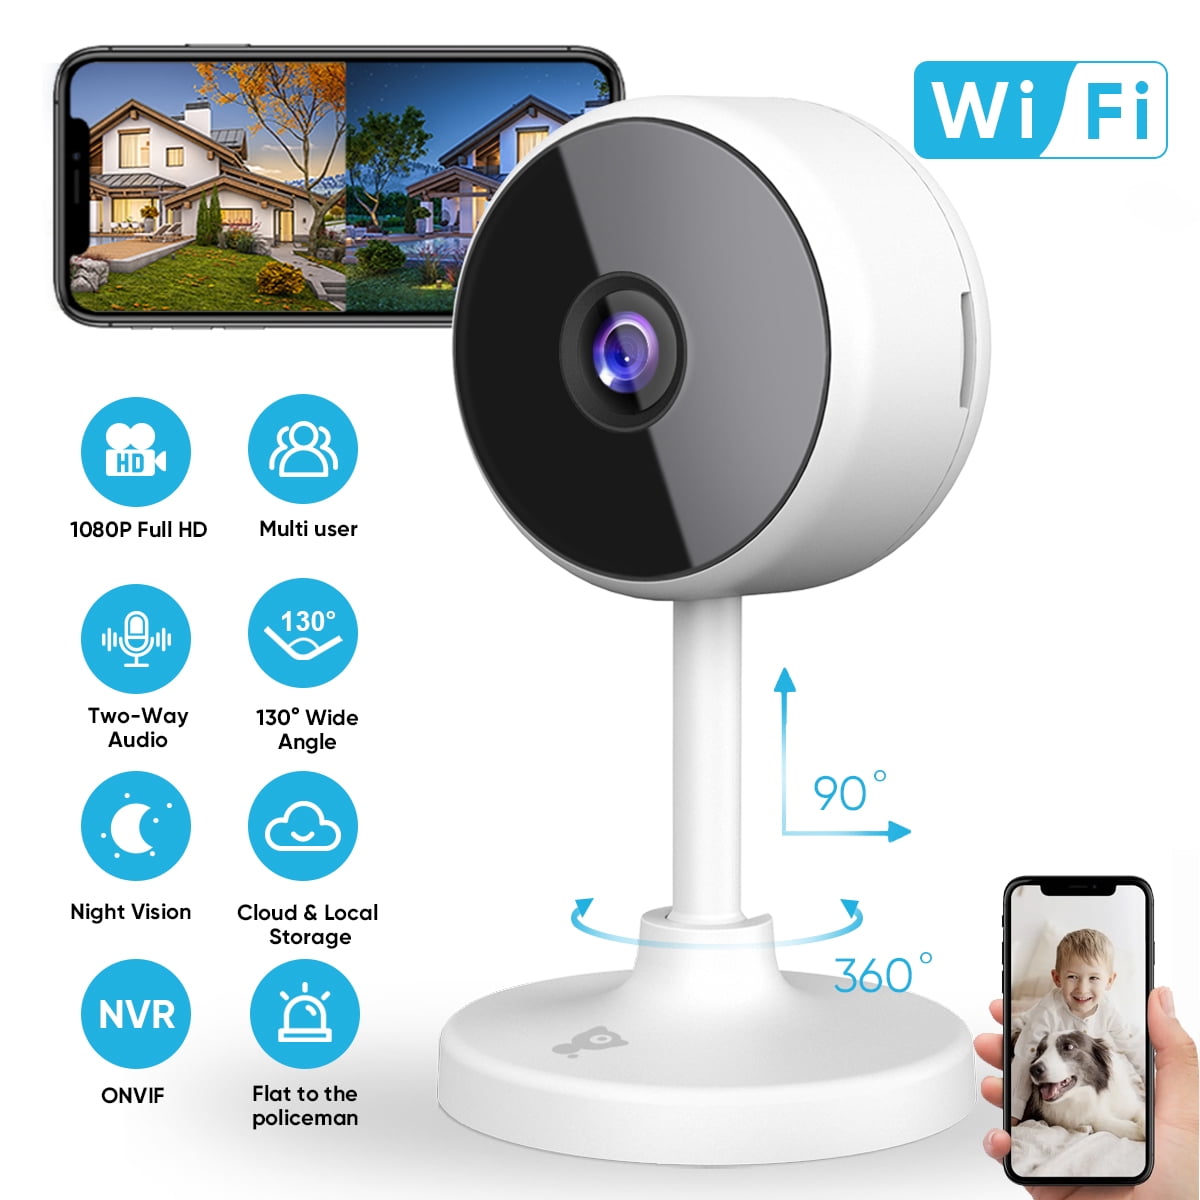 Littlelf Indoor Wireless Security Camera Motion Detection Night Vision FHD WiFi IP Camera 